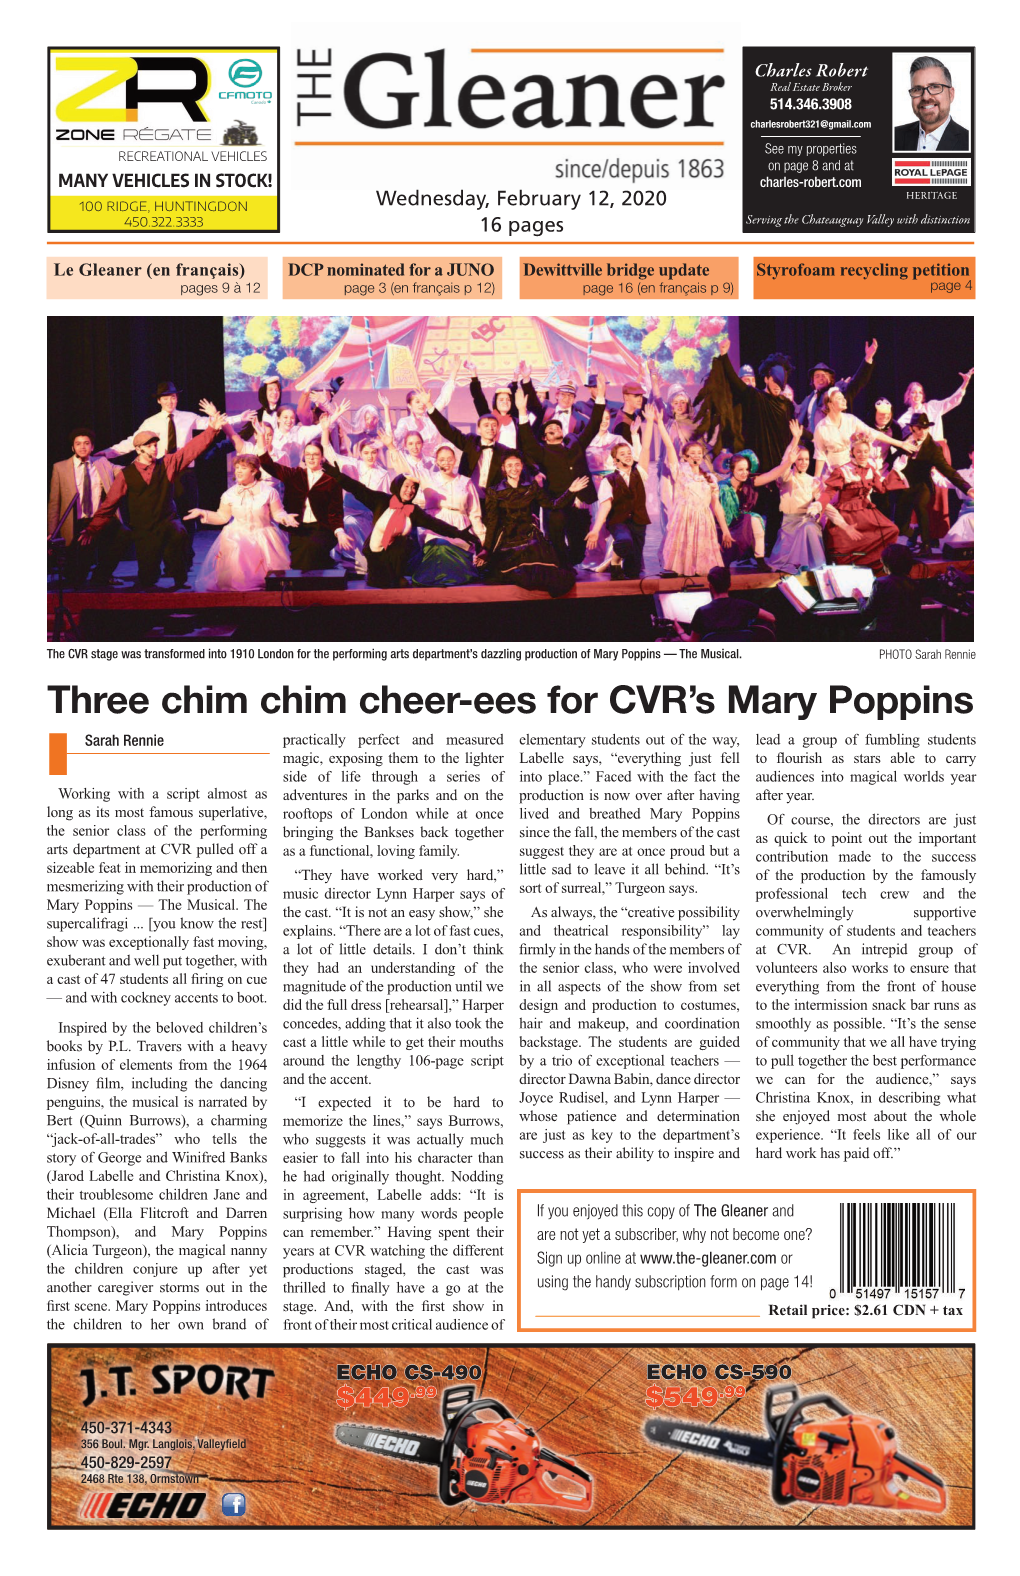 Three Chim Chim Cheer-Ees for CVR's Mary Poppins